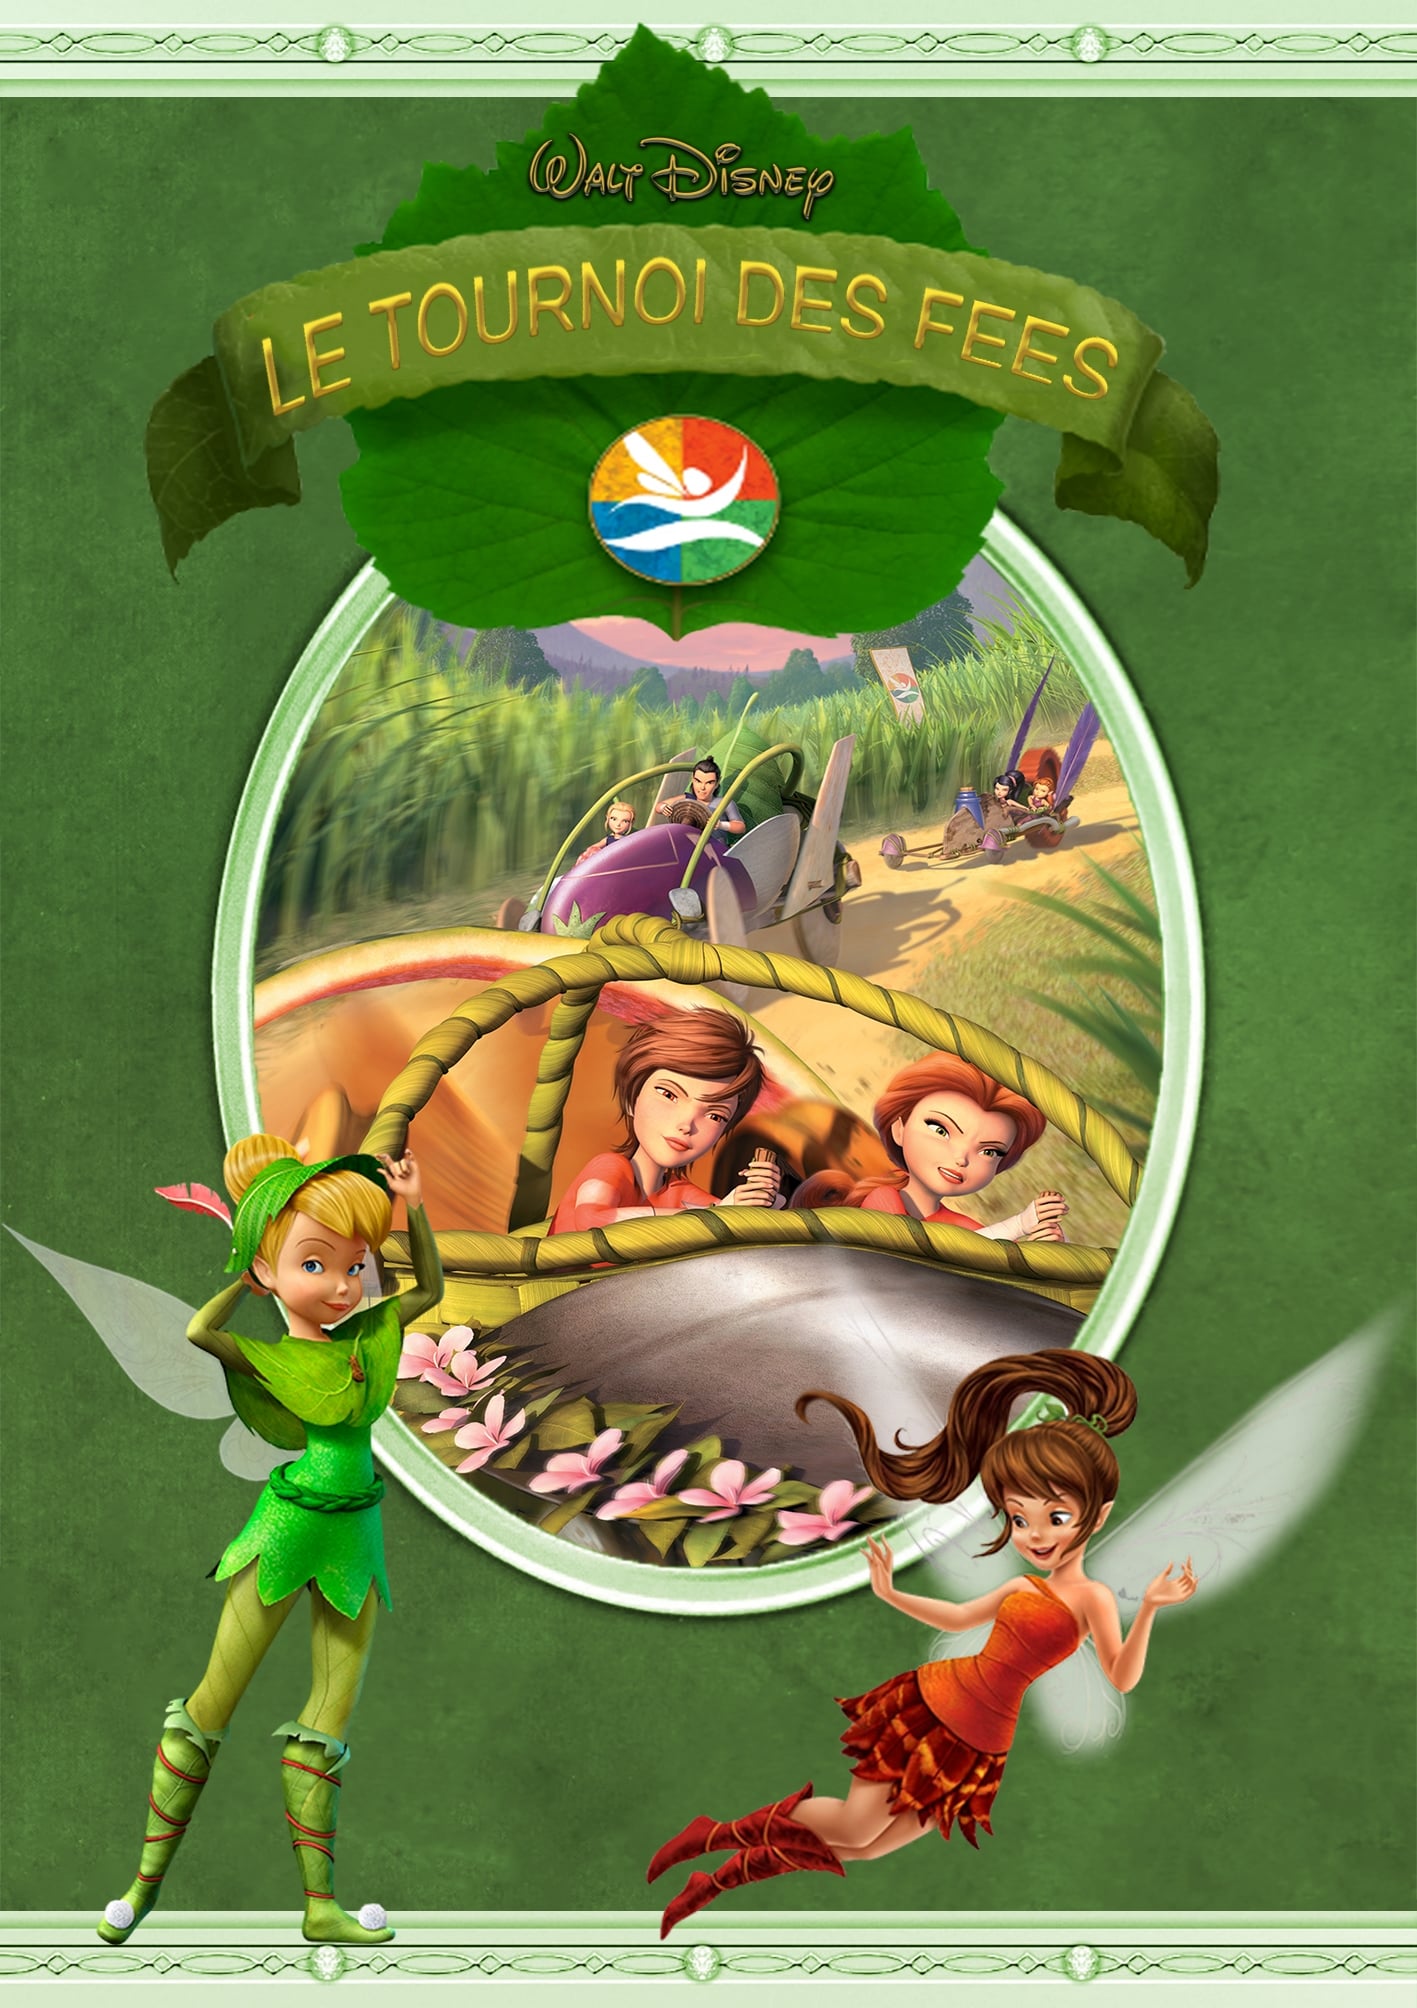 2011 Pixie Hollow Games